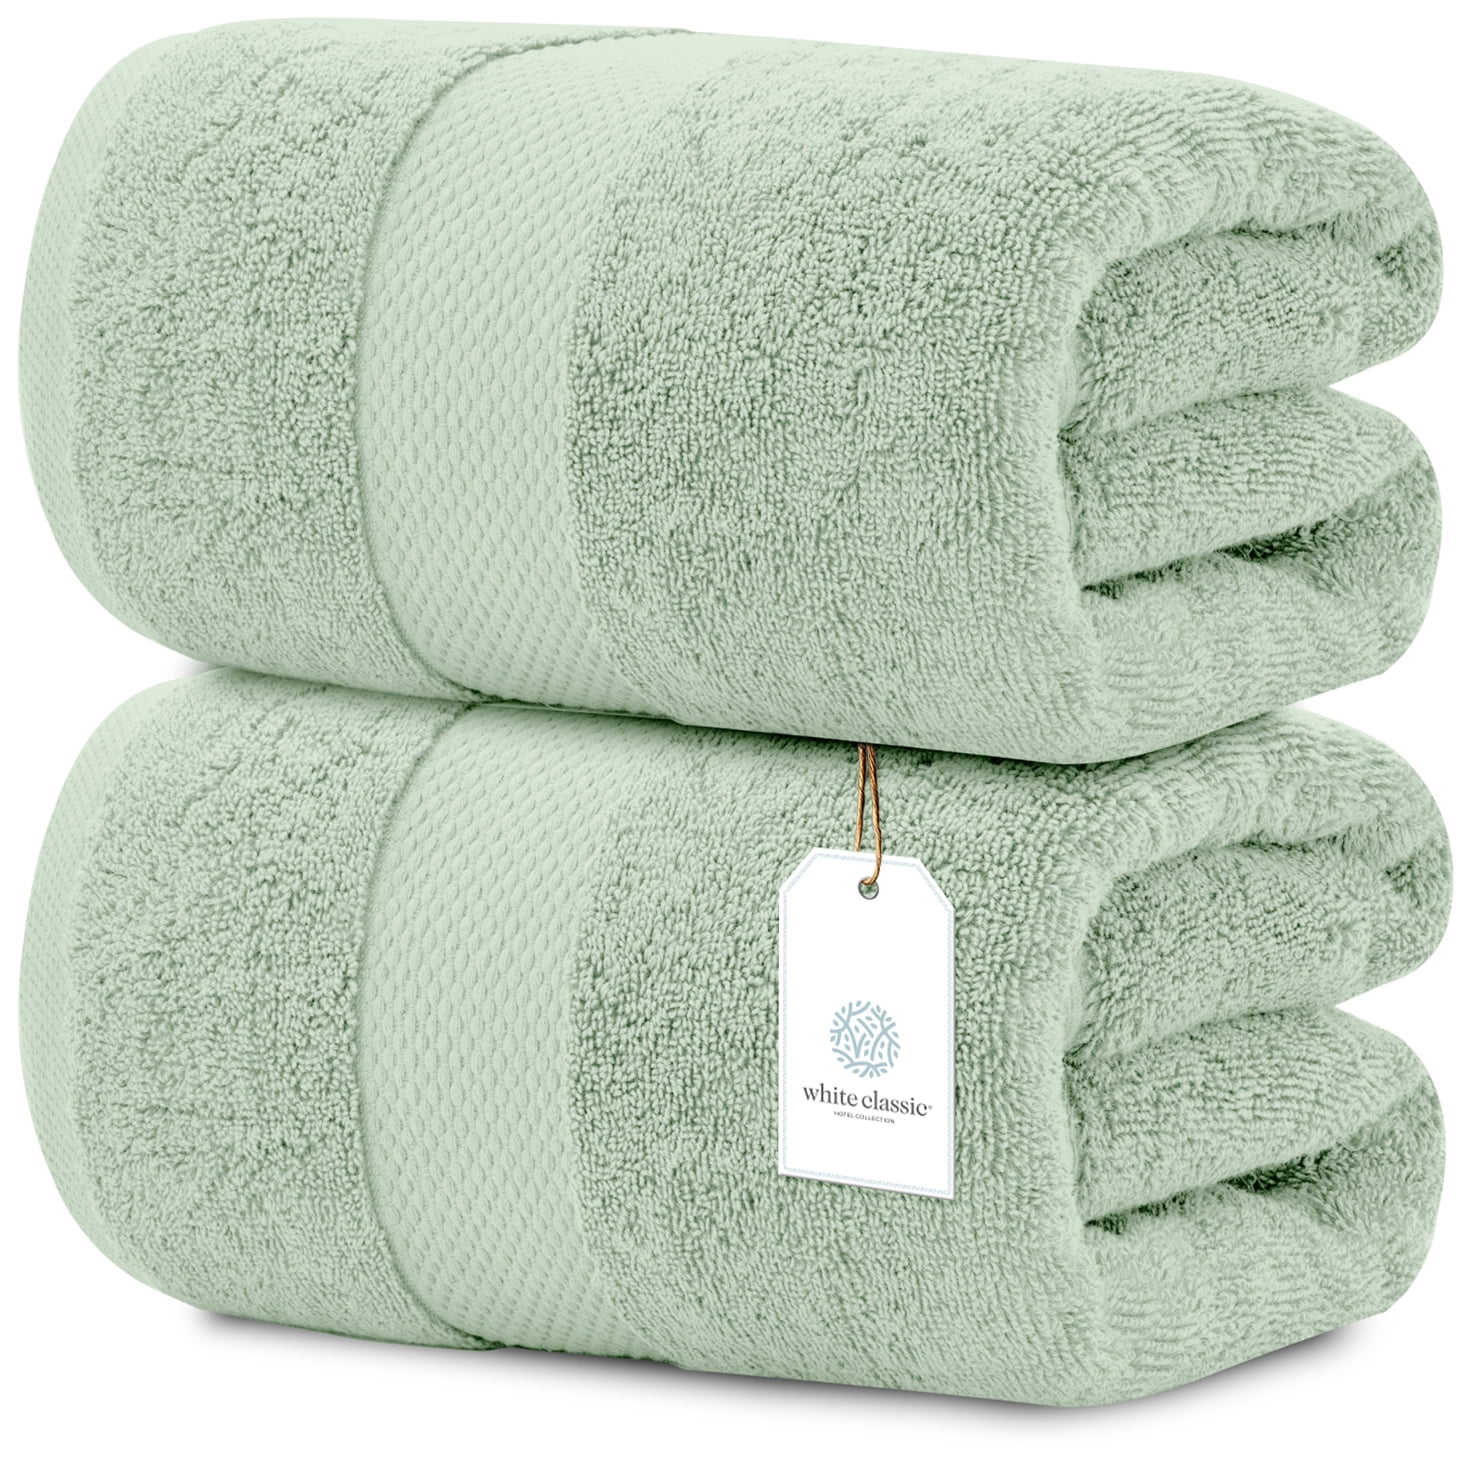 Extra Large Cotton Bath Towels Sheet Quick Dry Soft Absorbent Luxury  73x39